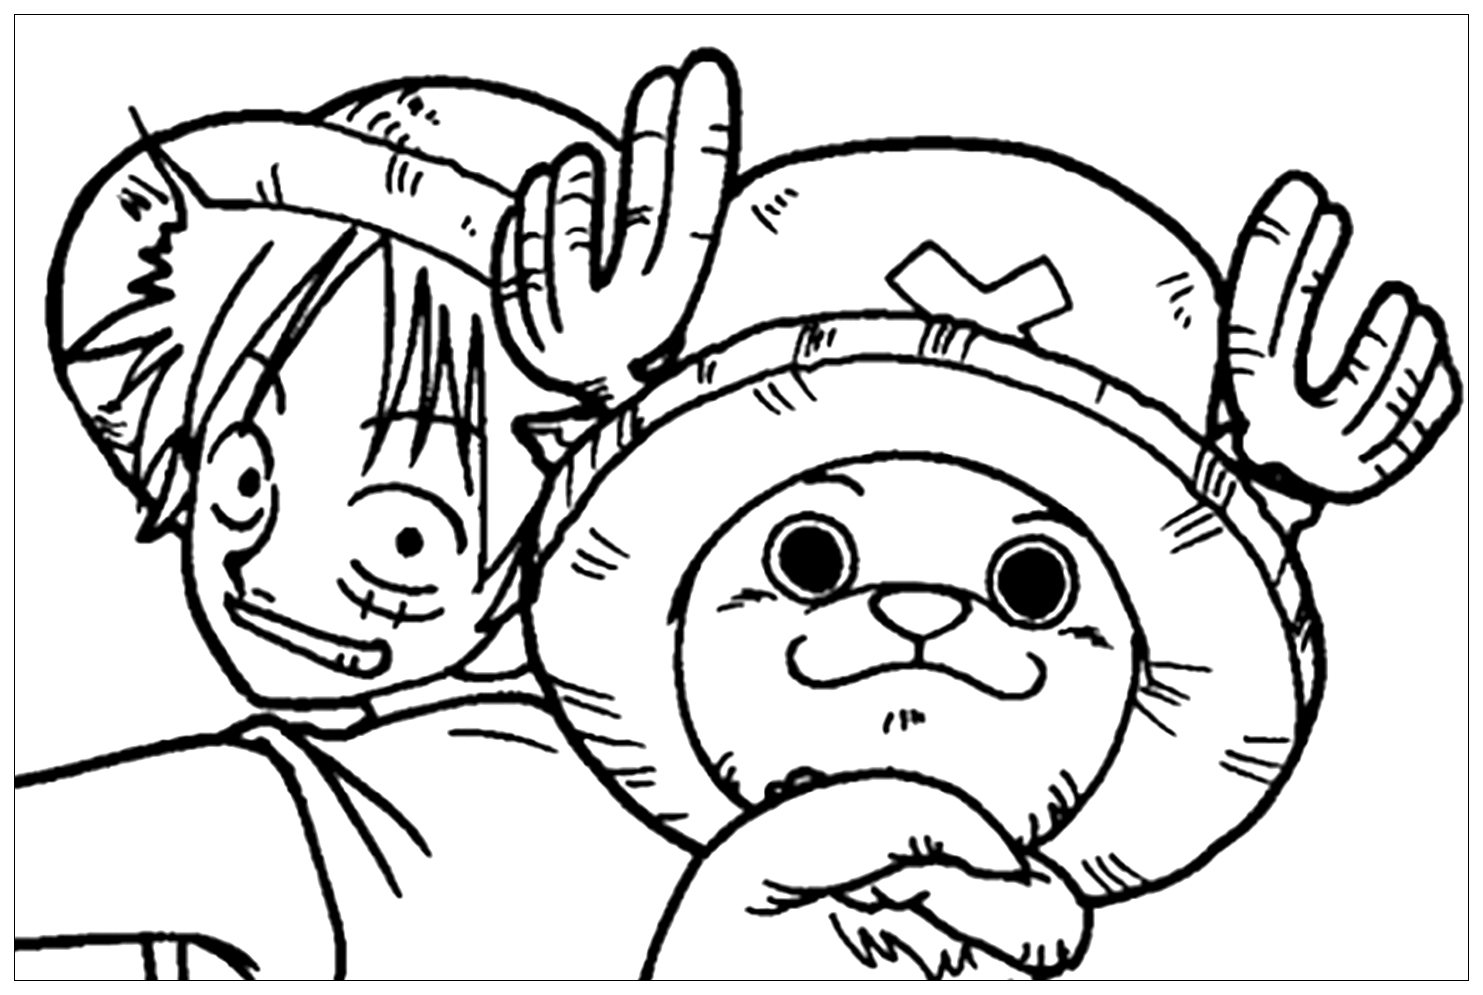 One piece coloring pages to download - One Piece Kids Coloring Pages